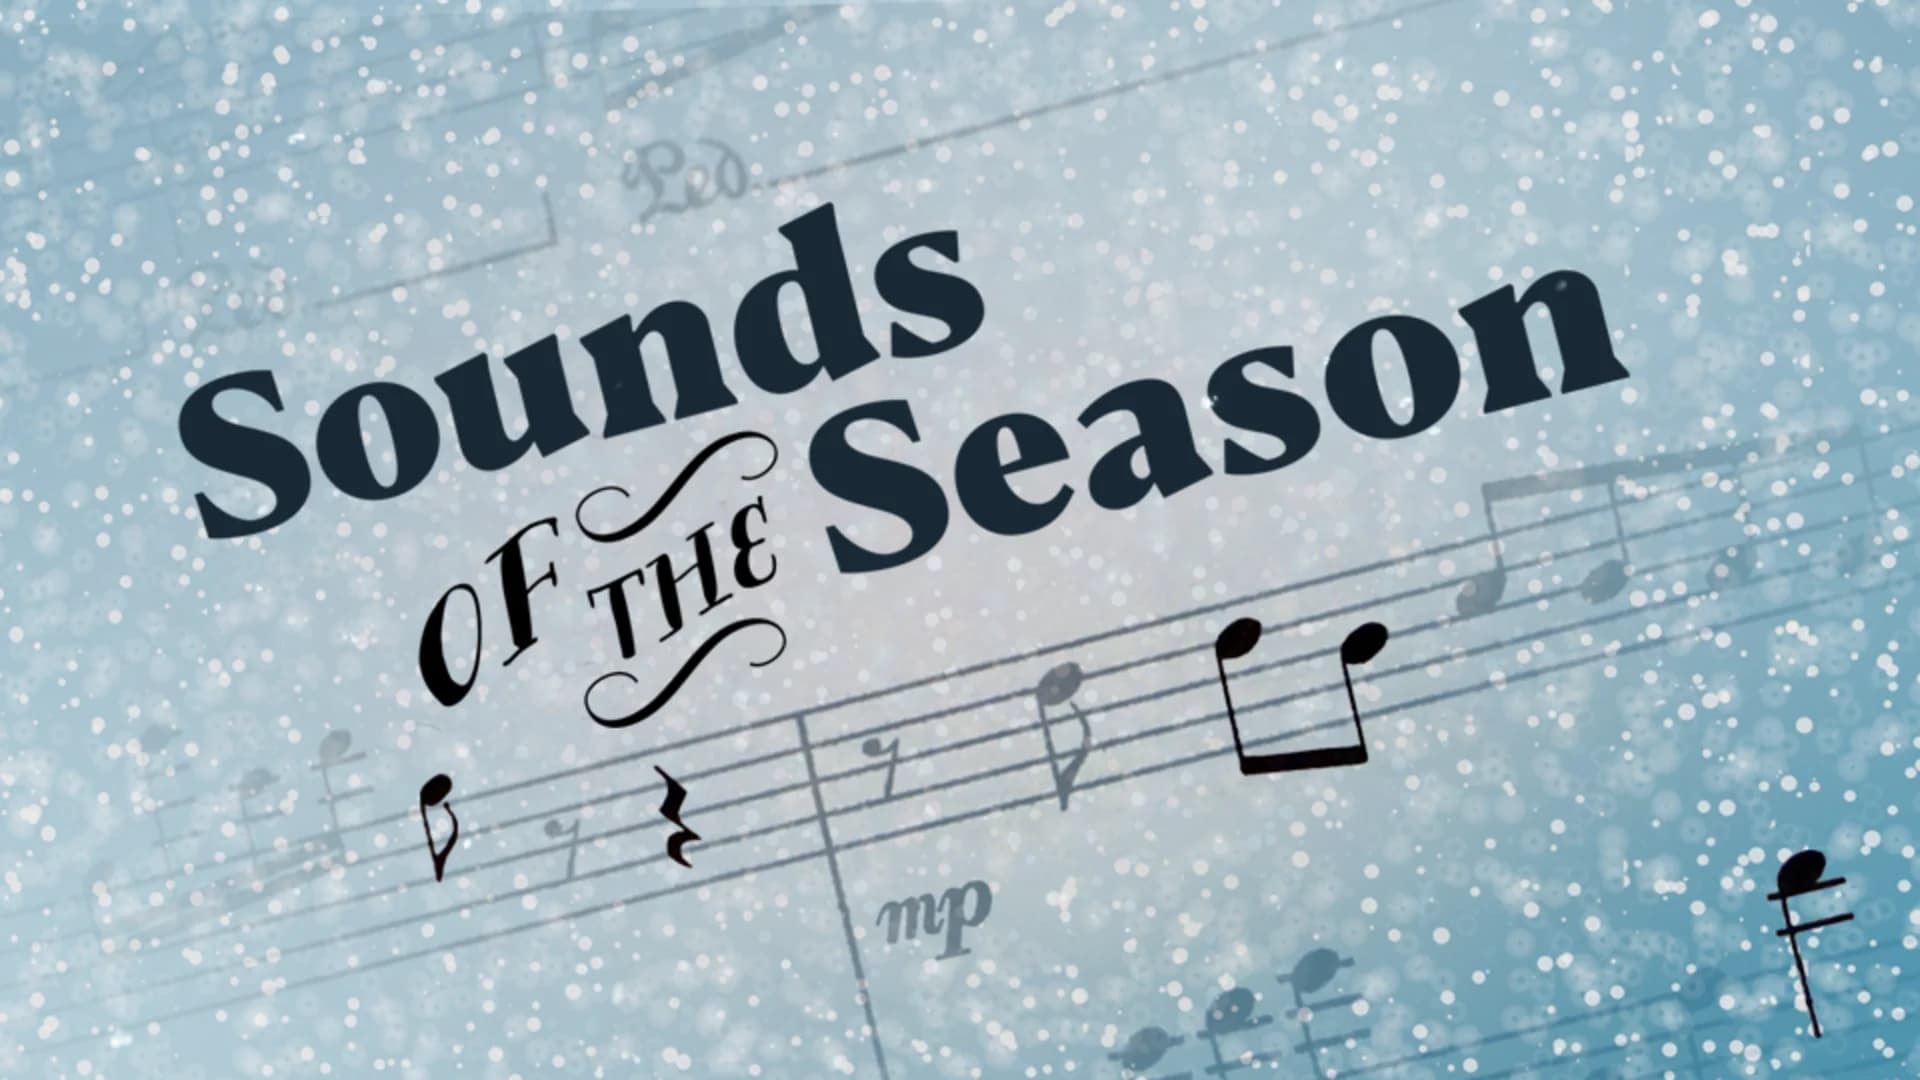 Sounds of the Season voting ends on Long Island